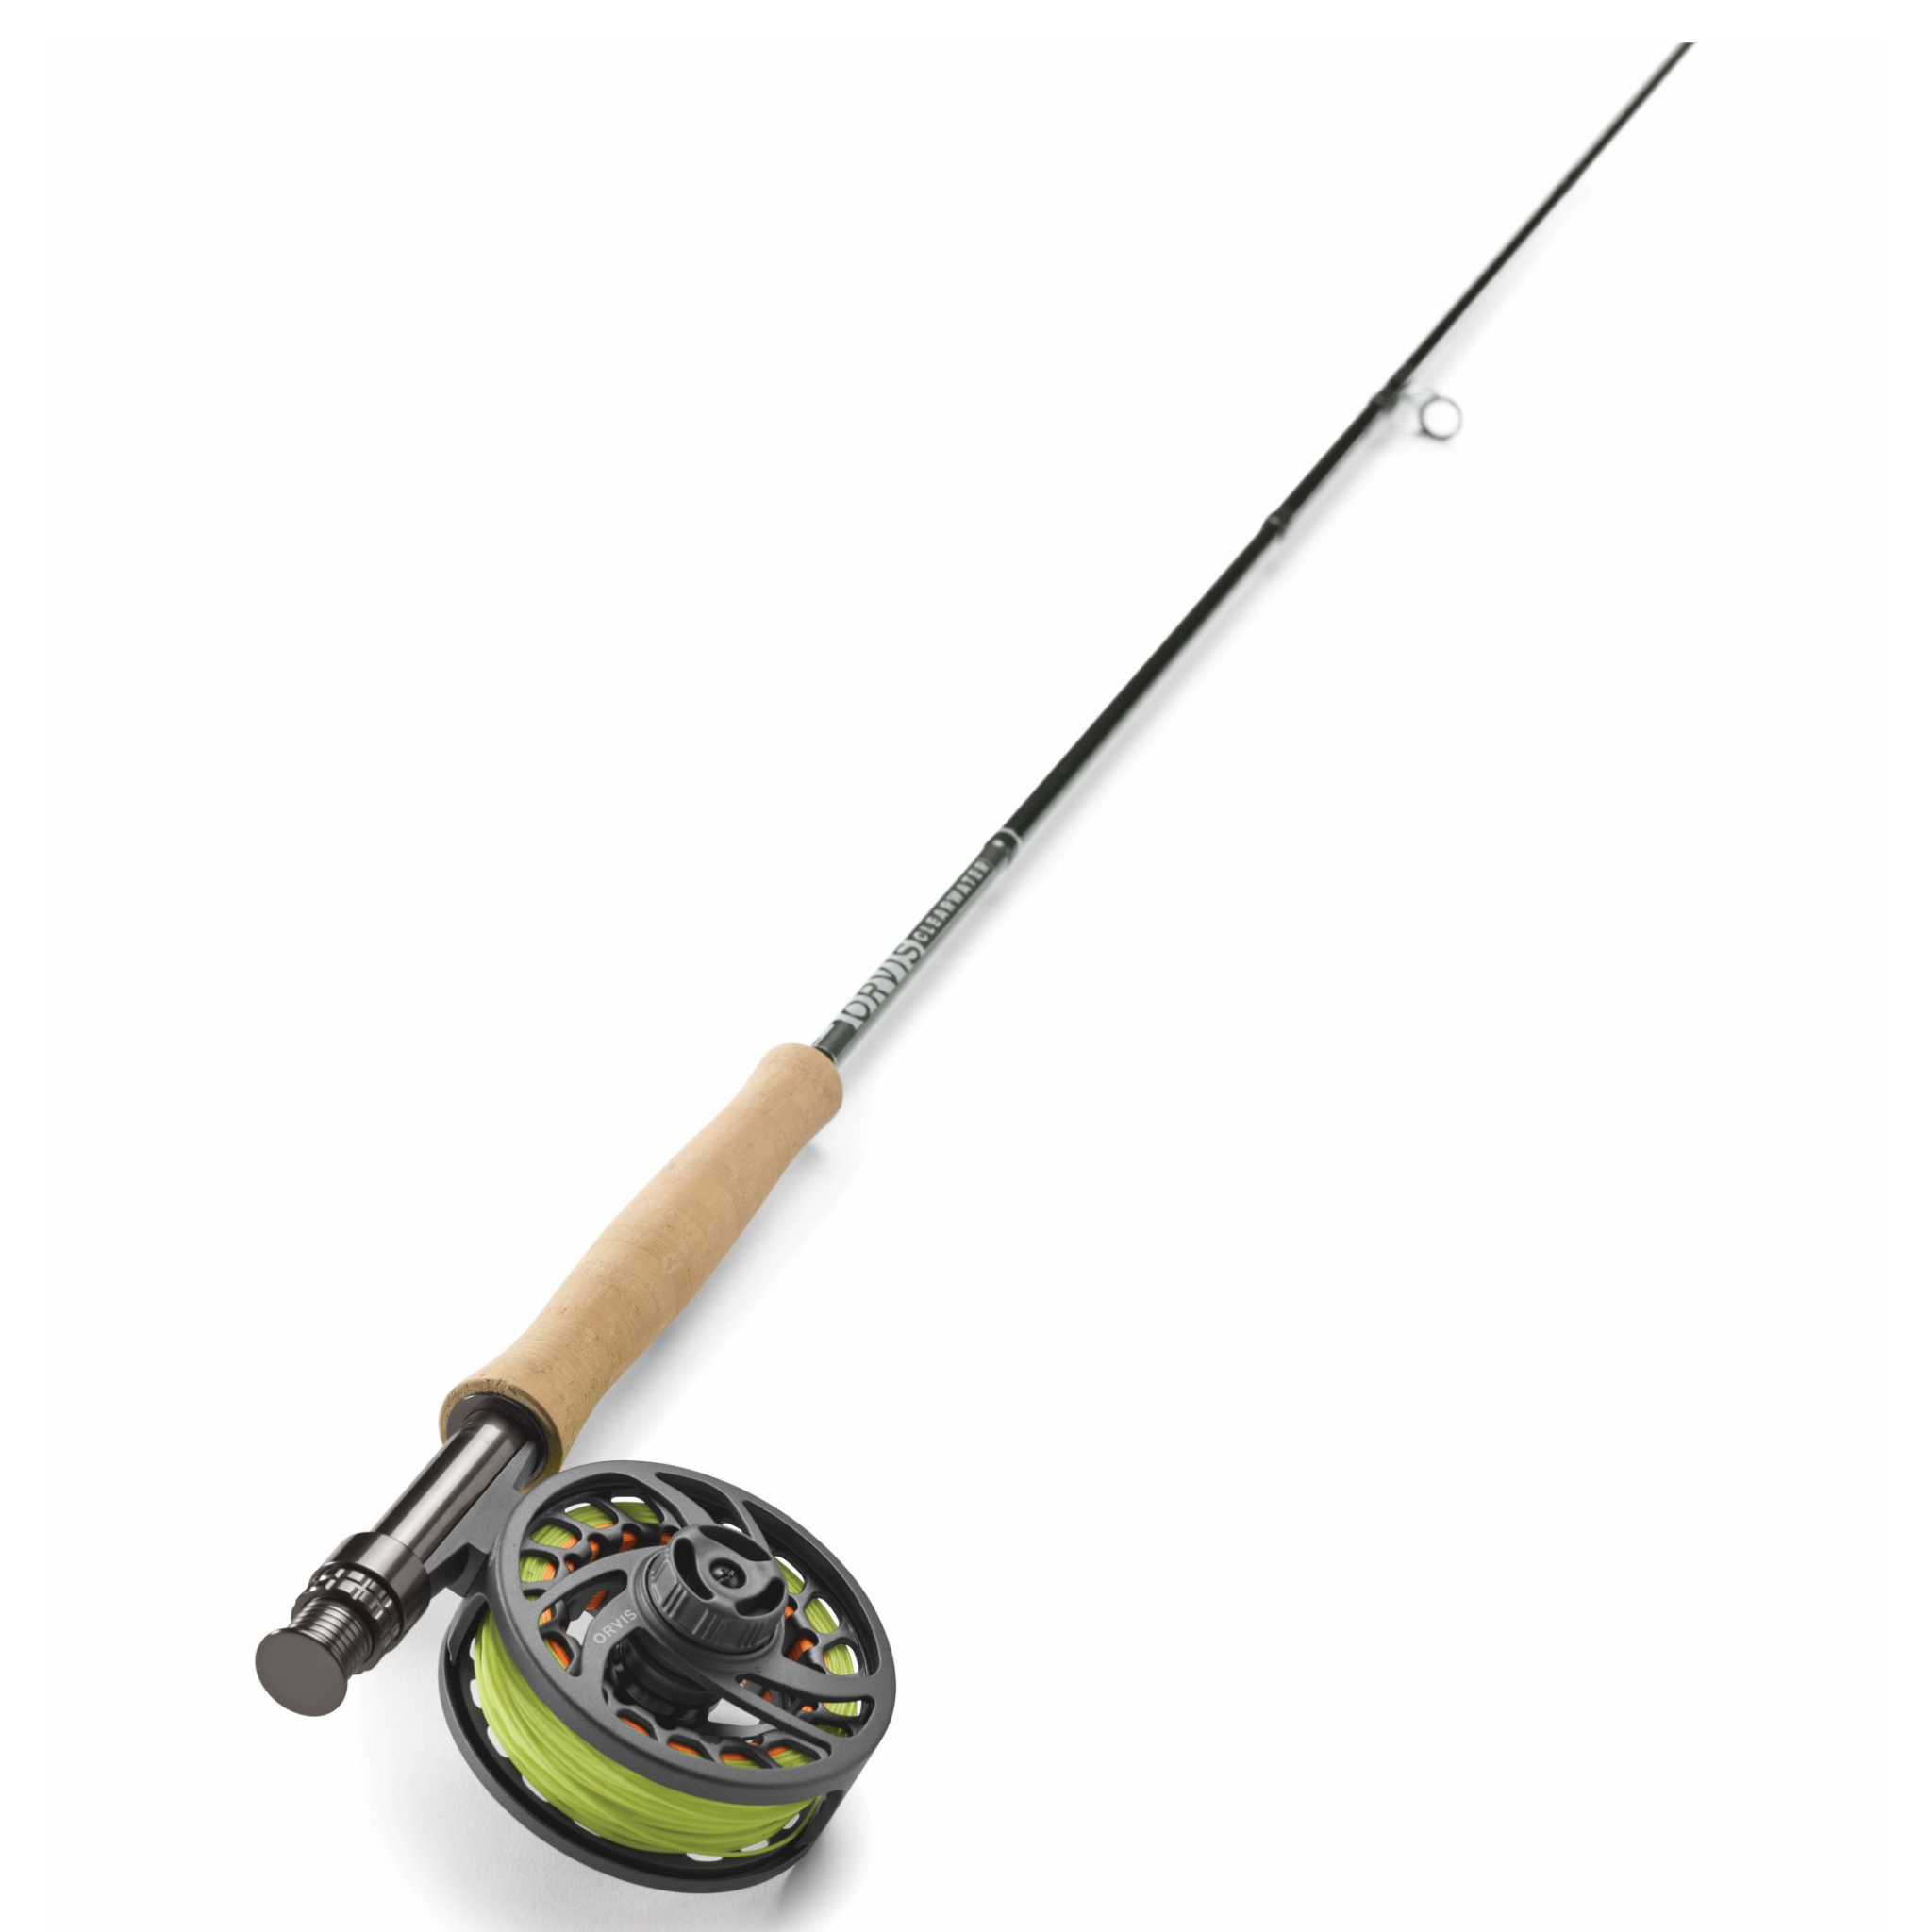 Clearwater 905-4 Boxed Outfit - ( ORVIS)